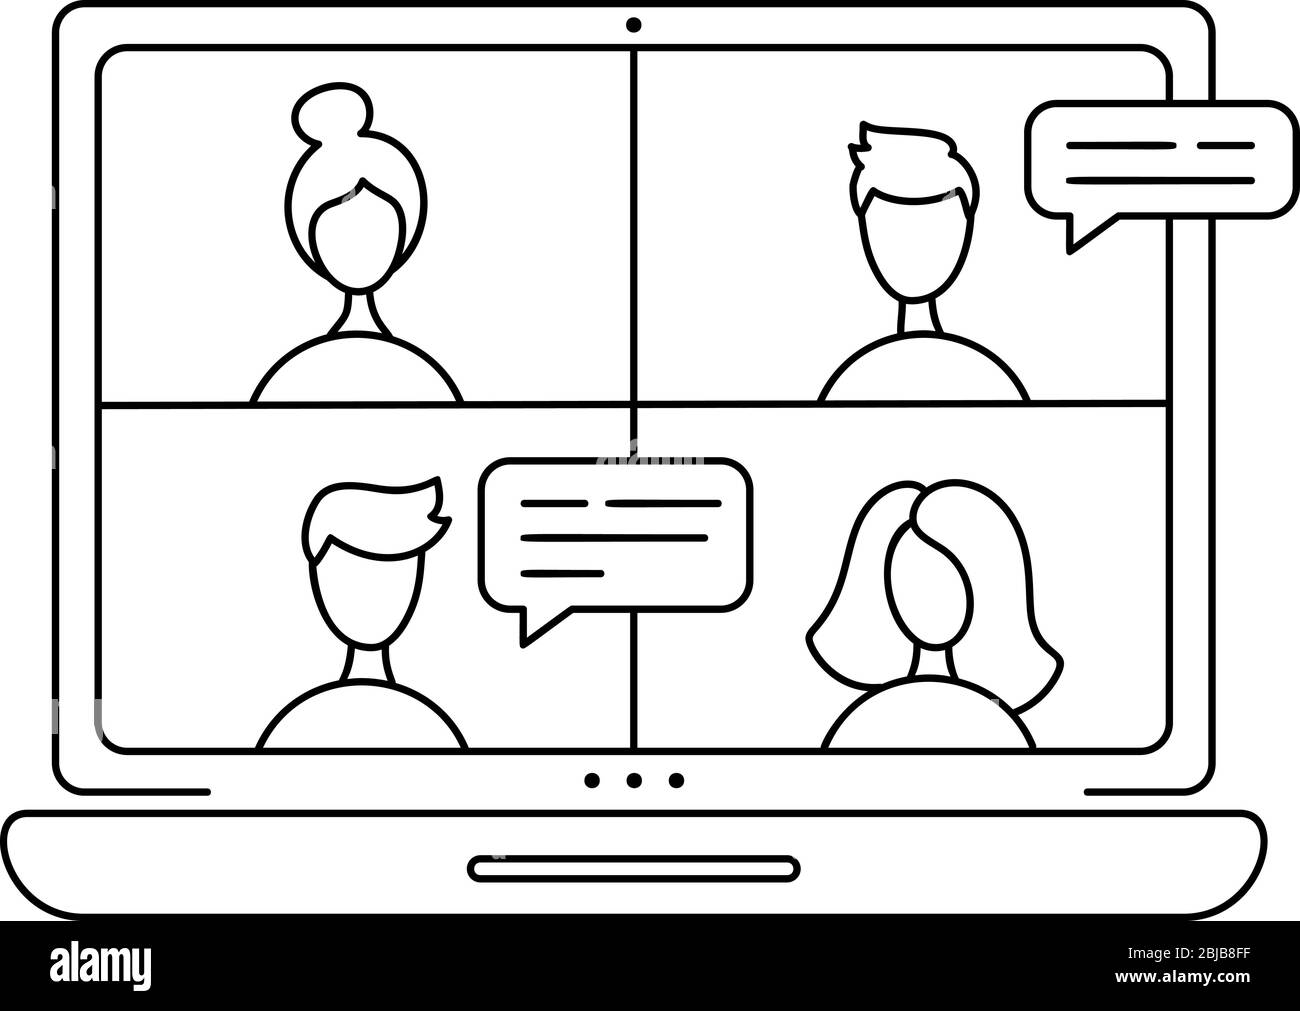 Vector Icon Monoline Online Meeting Via Group Call Four People In Video Chat Coleagues In Video Conference At Office Or Home Concept Freelance Stock Vector Image Art Alamy